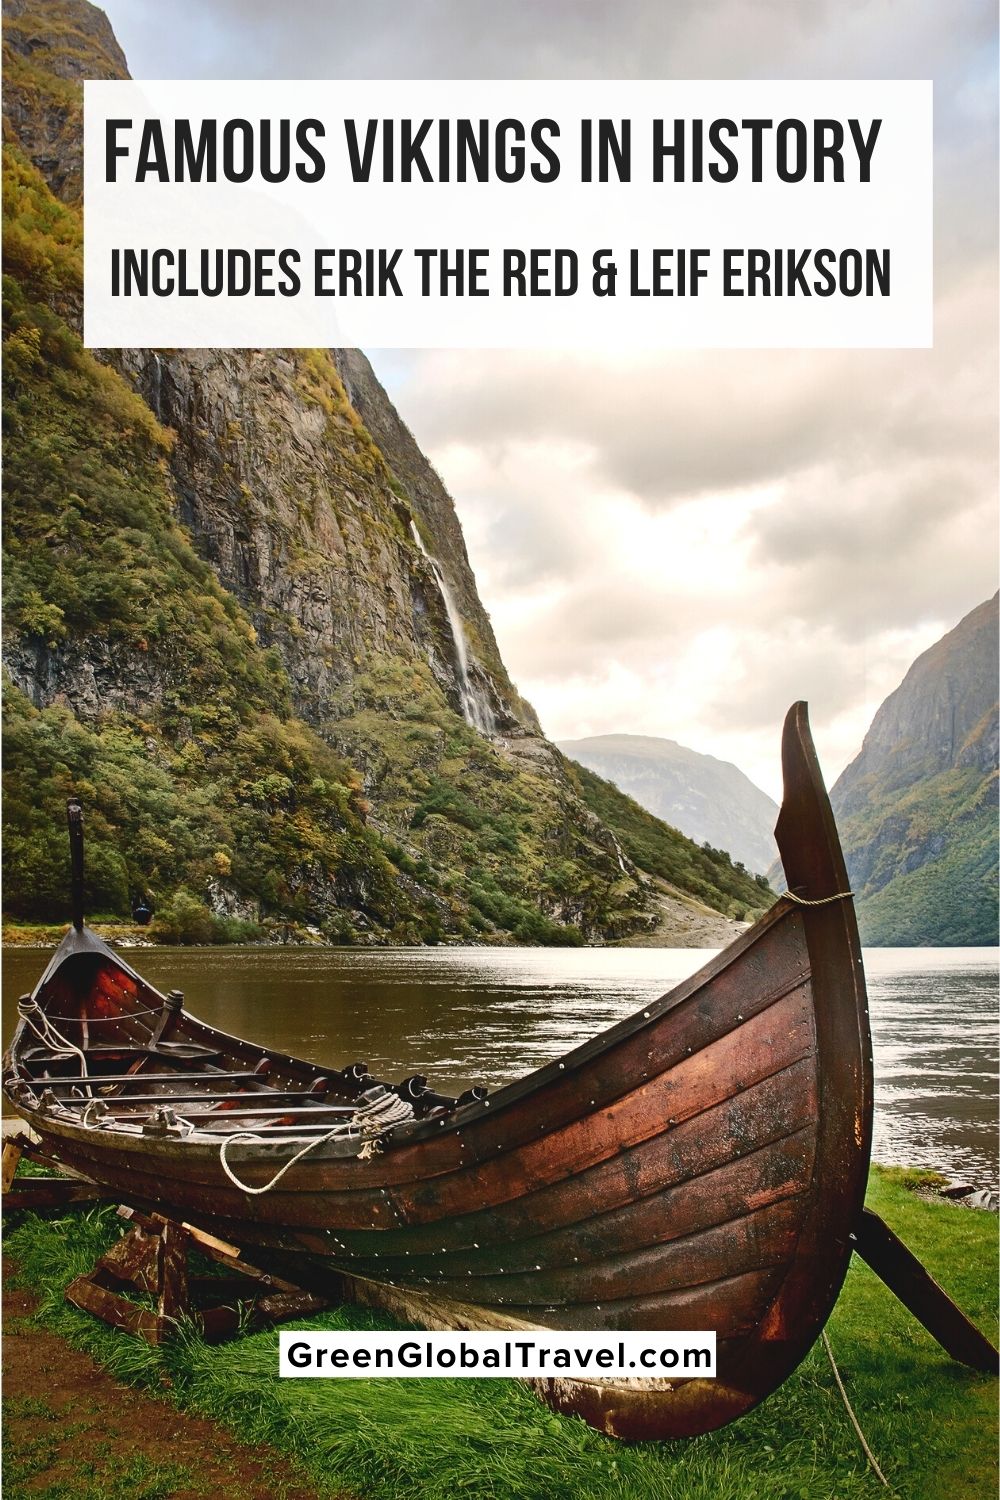 A look at the Vikings westward expansion including the explorations of Leif Ericsson and his legendary father, Erik the Red. Includes the history of Vikings in Iceland, Vikings in Greenland, and Vikings in Canada.